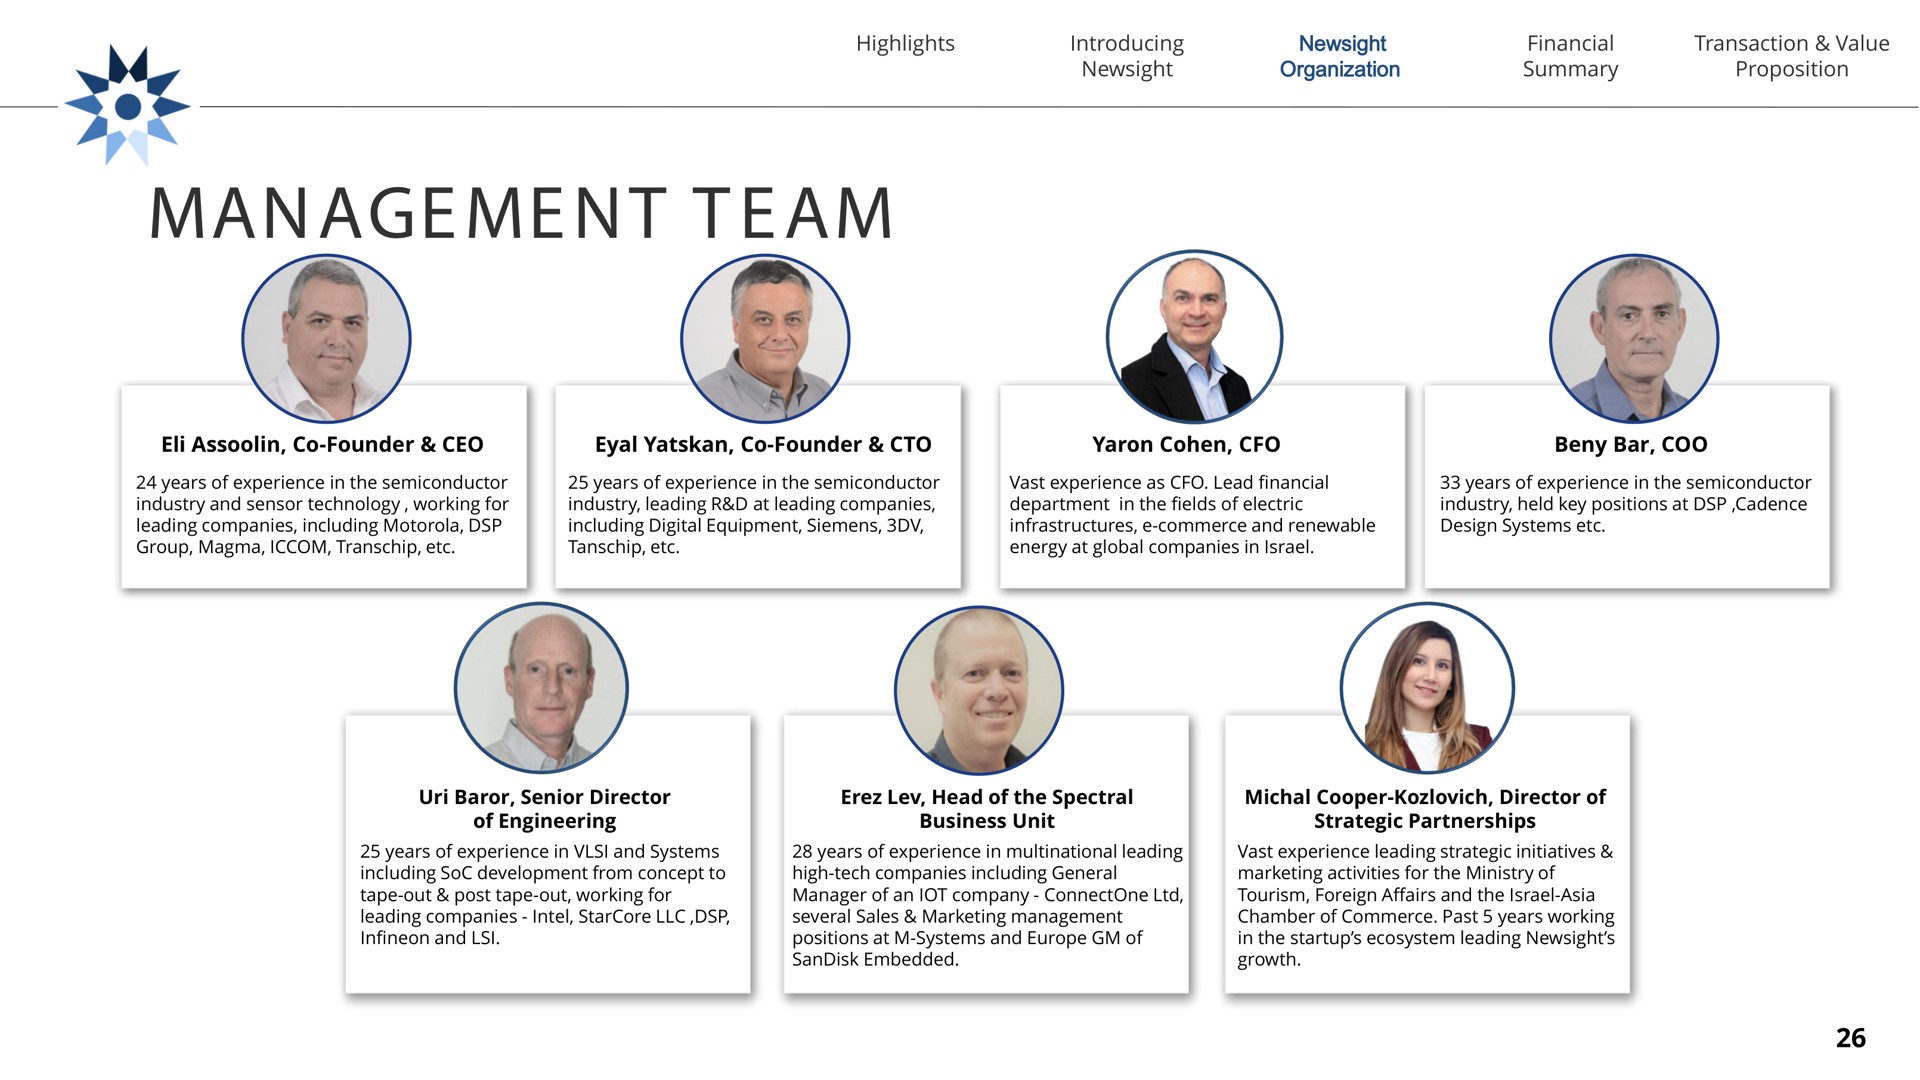 manage me am a management team | Newsight Imaging